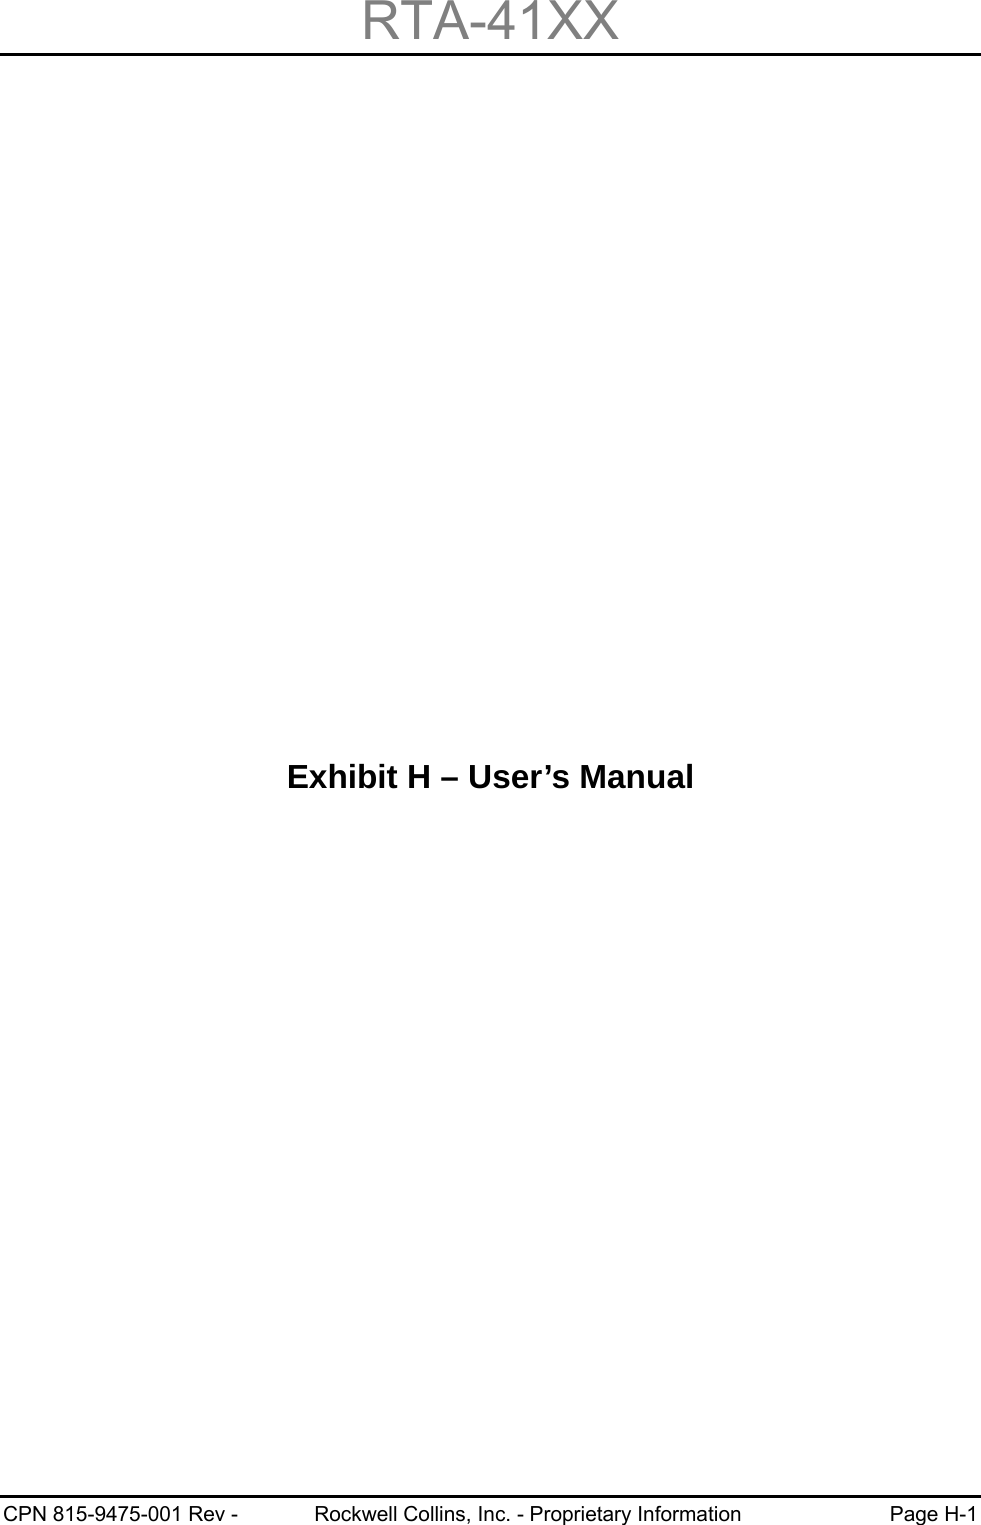 RTA-41XX CPN 815-9475-001 Rev -  Rockwell Collins, Inc. - Proprietary Information  Page H-1 Exhibit H – User’s Manual 